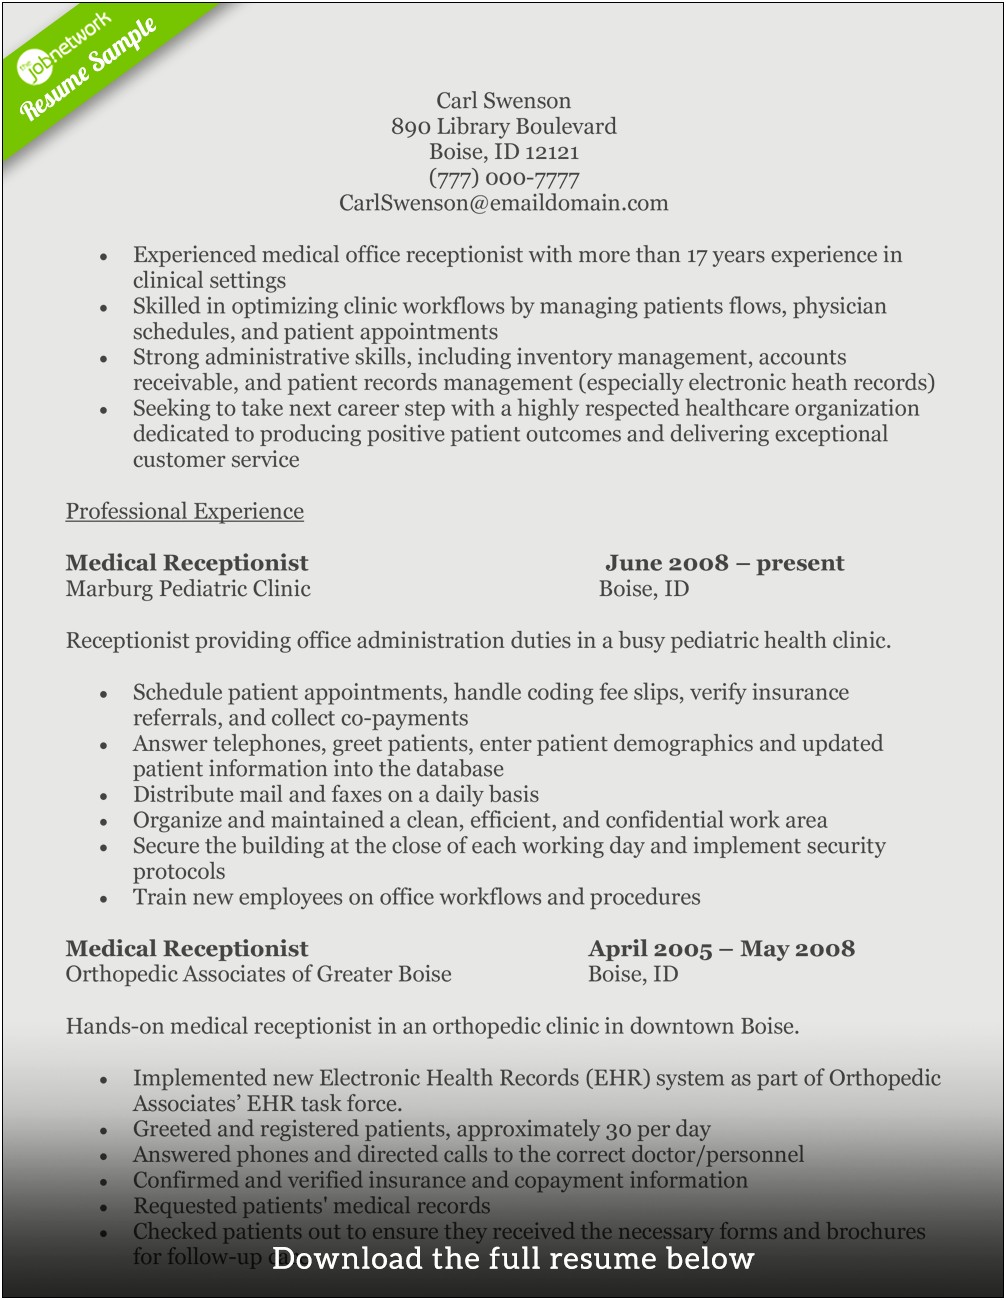 Free Resume Templates For Receptionist Position